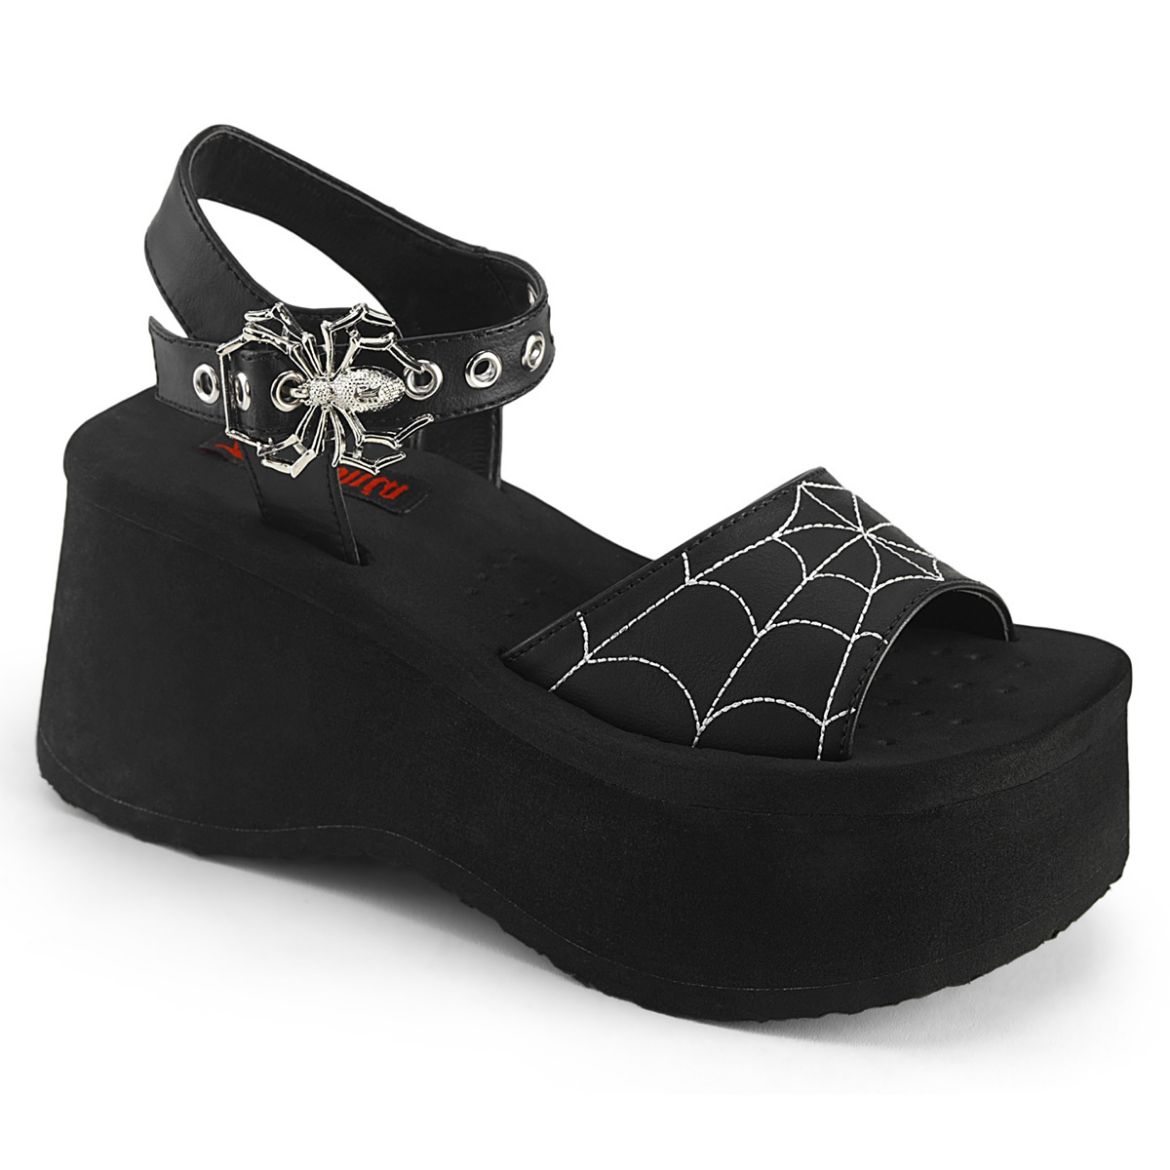 Product image of Demonia FUNN-10 Blk Vegan Leather 2 1/2 Inch PF Ankle Strap Sandal